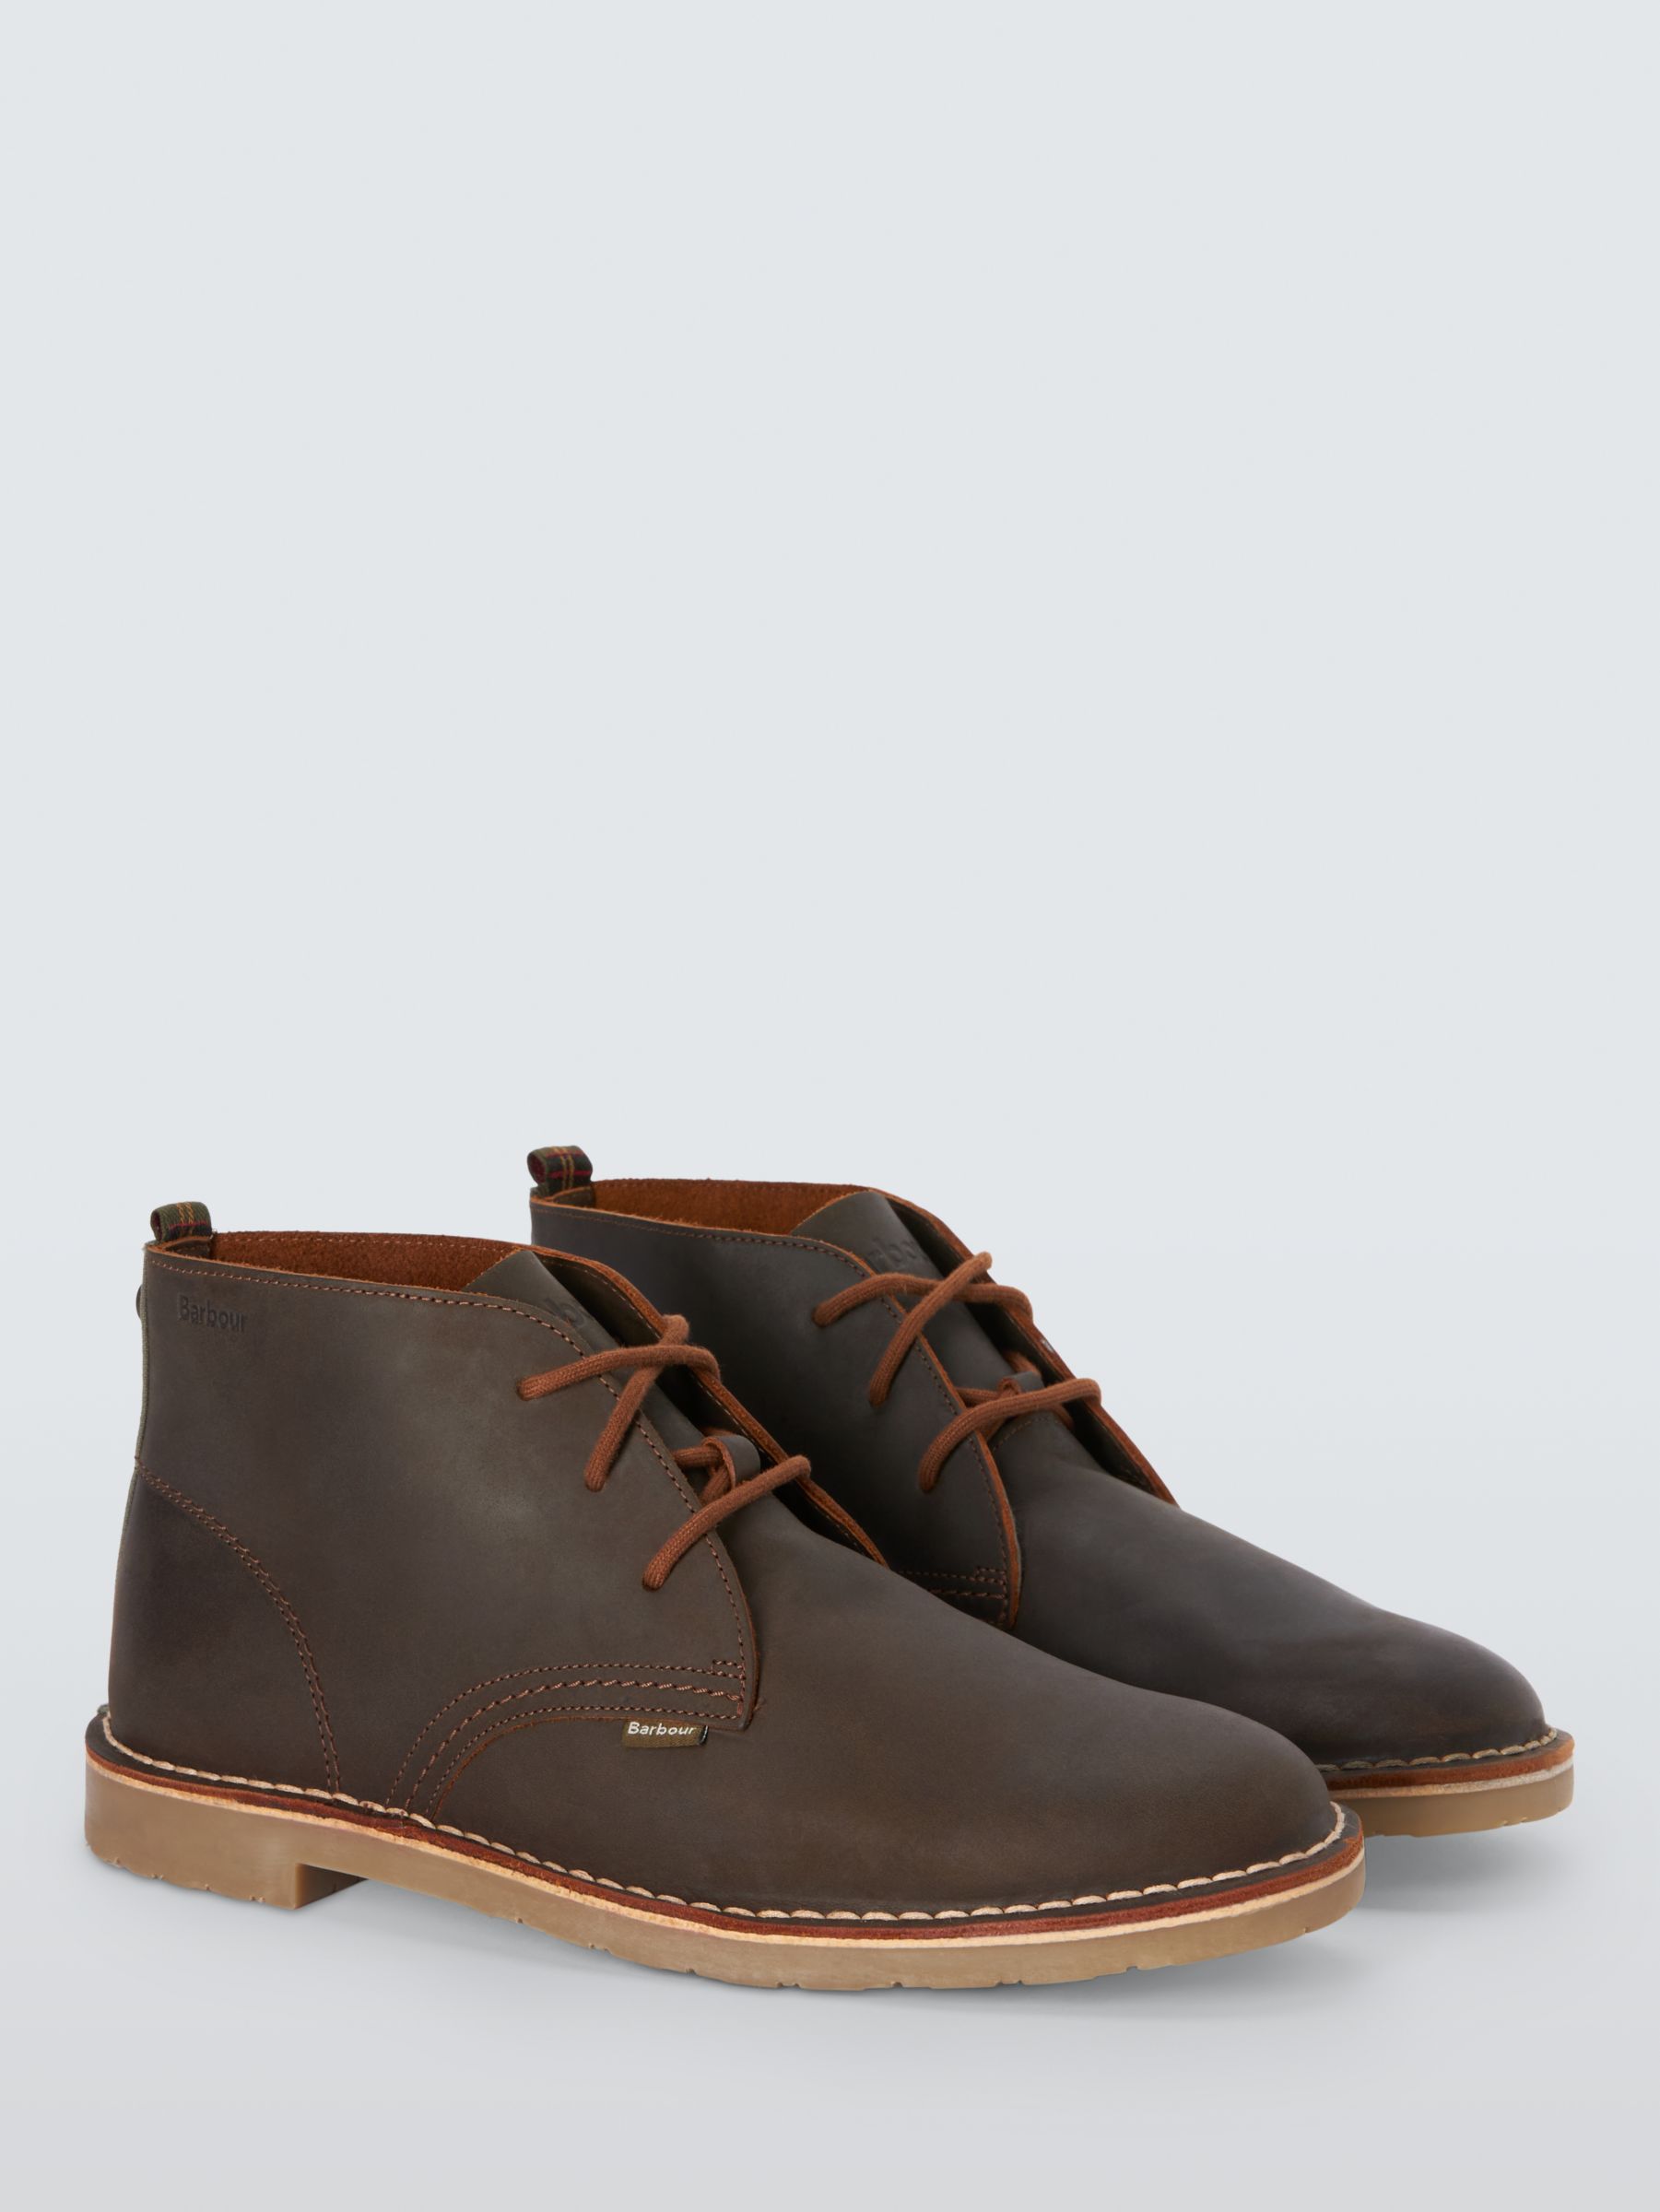 Barbour Siton Leather Desert Boots, Beeswax, 8